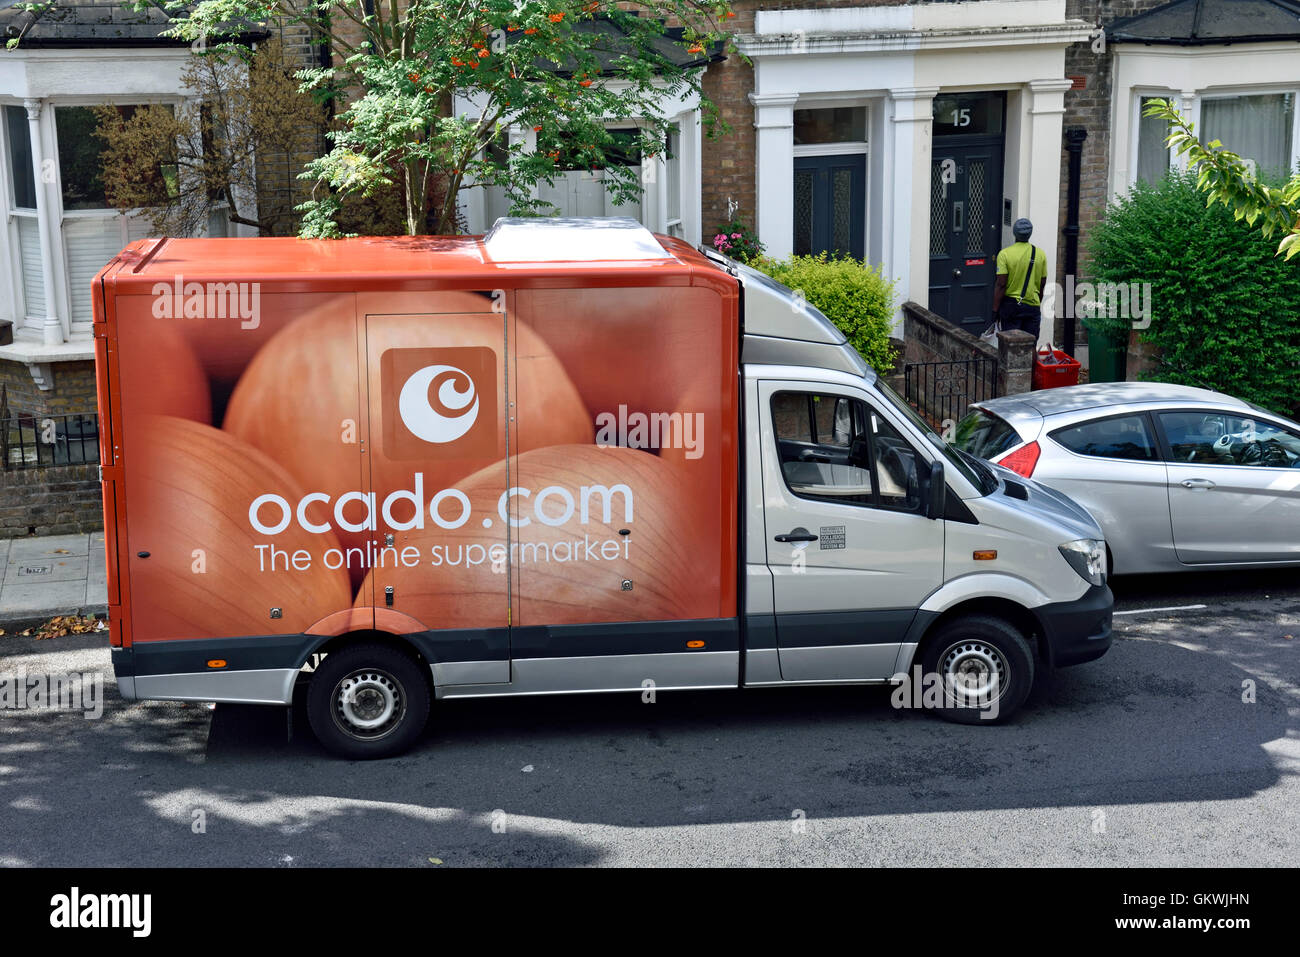 Ocado Van with driver delivering groceries food to a house in urban street  Holloway, London Borough of Islington, England Britain UK Stock Photo